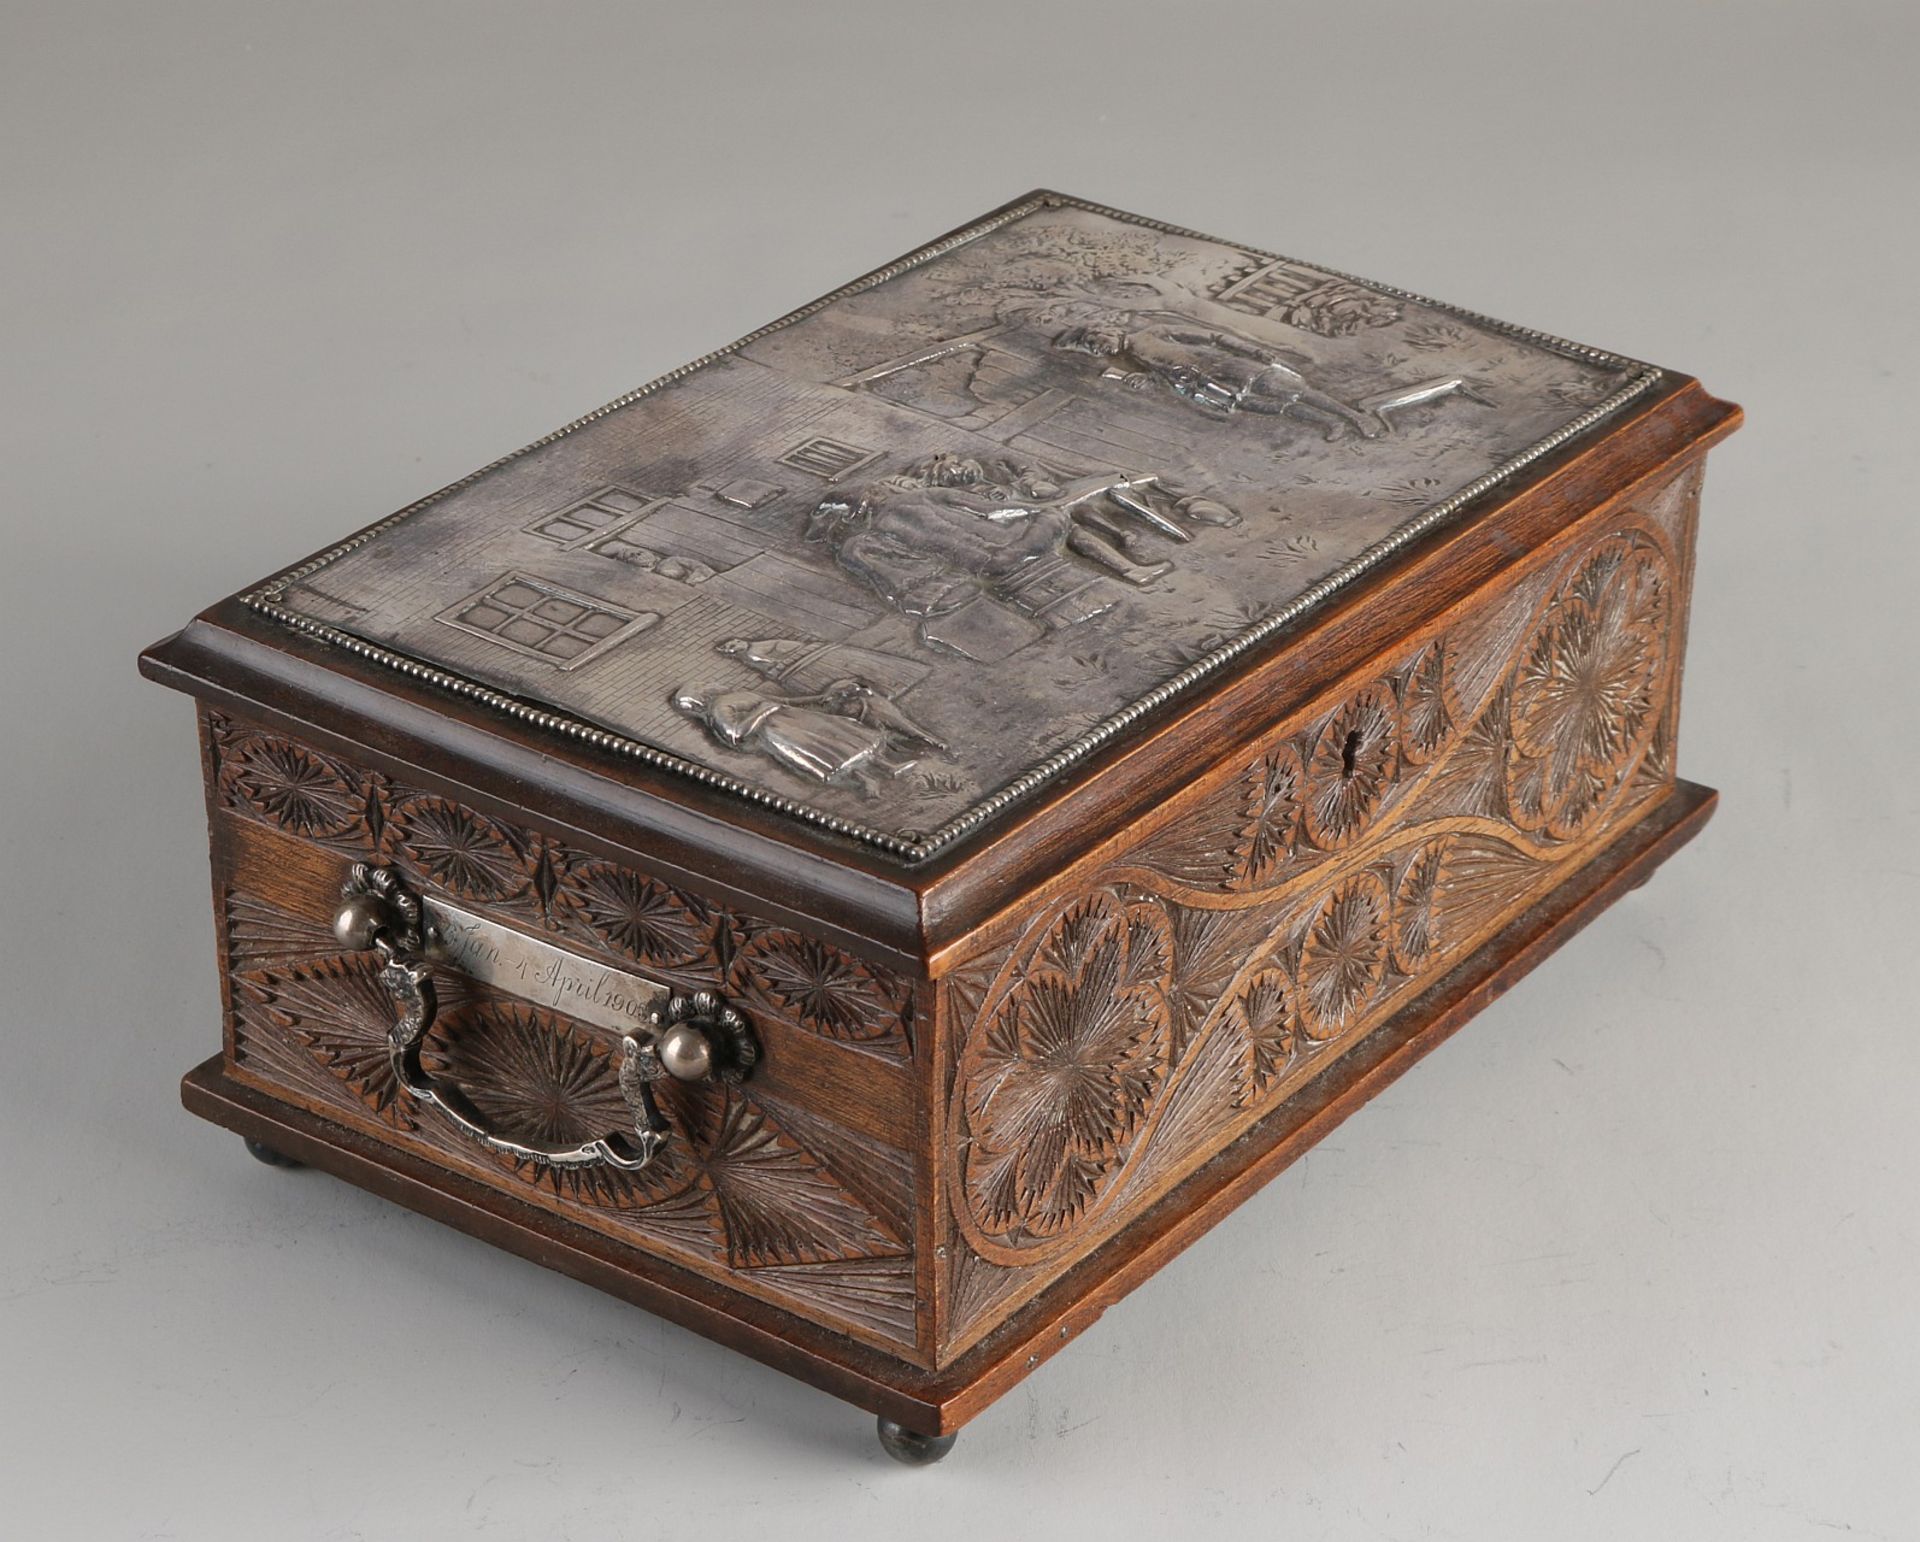 Frisian carved box with silverware - Image 2 of 3